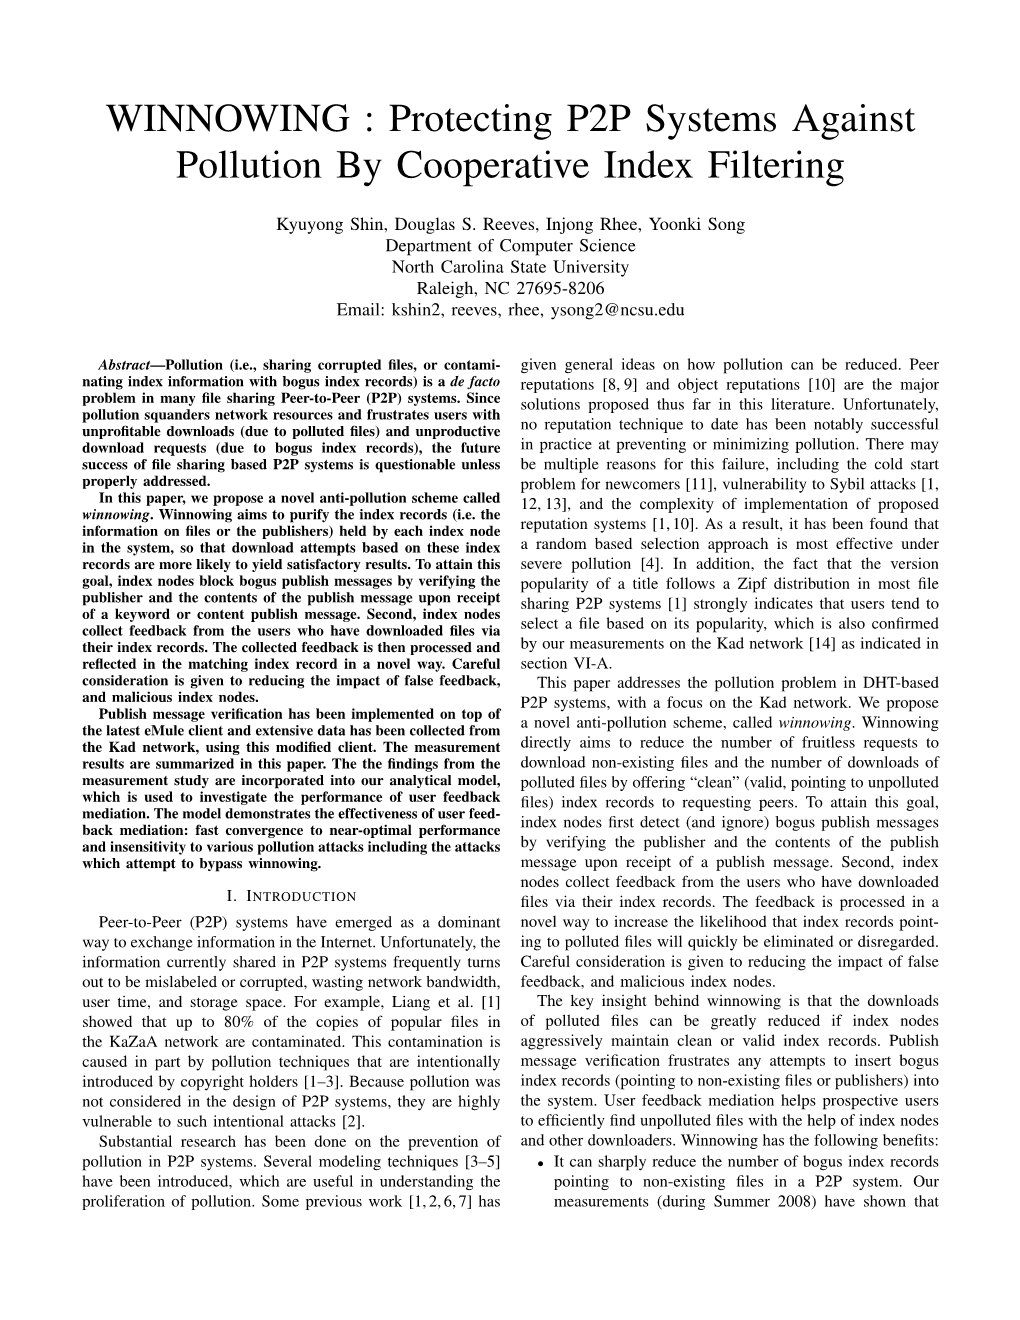 WINNOWING : Protecting P2P Systems Against Pollution by Cooperative Index Filtering